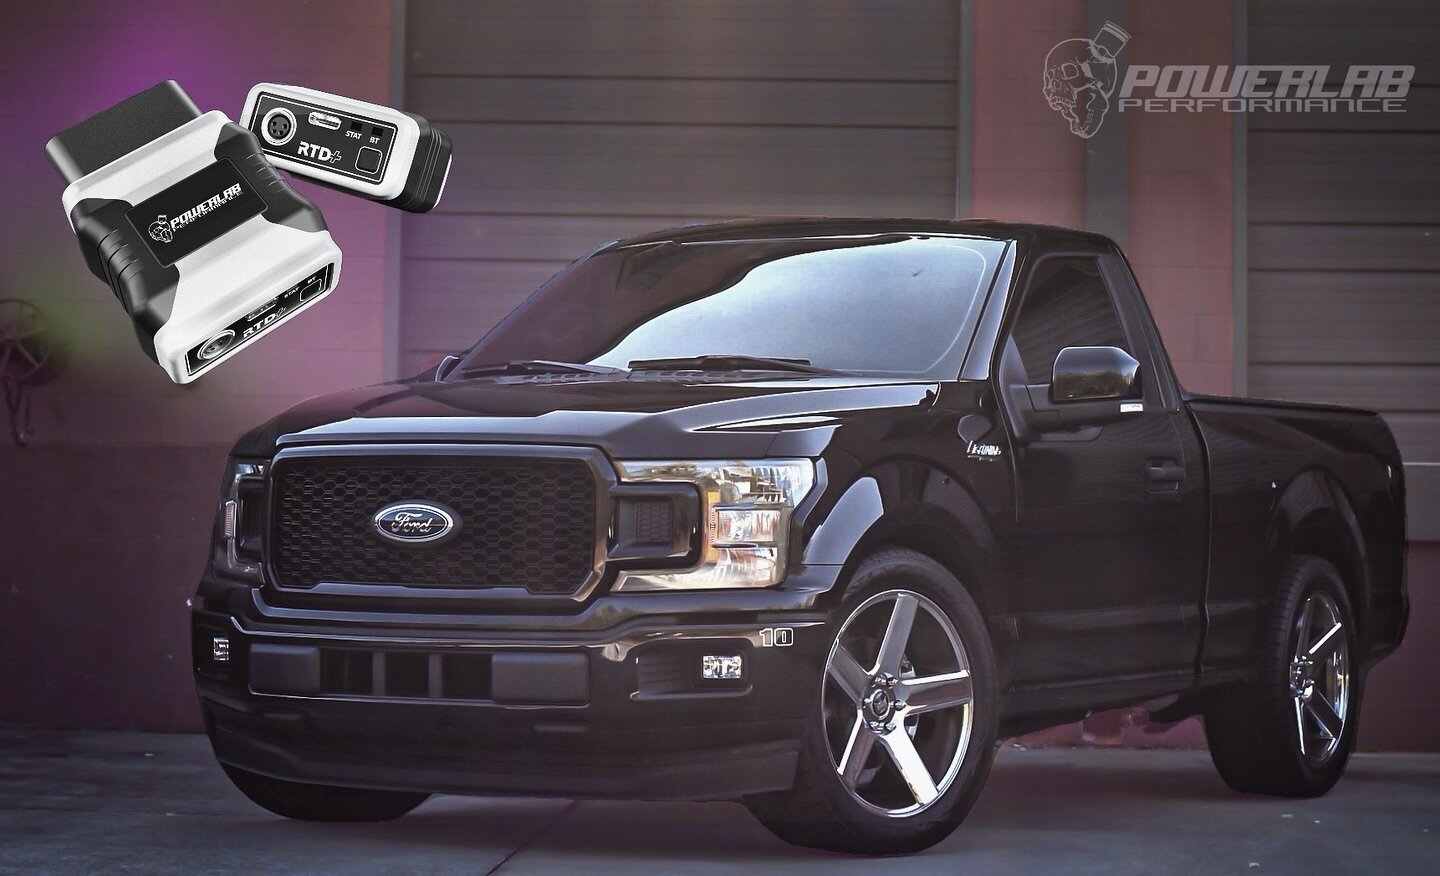 Take Your F-150 To The Next Level&hellip; 📈
 
🔷 Speed Limiter Removed
🔷 Auto Stop/Start Disabled
🔷 Increased Power/Response
🔷 Extensive Aftermarket Support
🔷 Improved Transmission Performance &amp; More
 
⚡️ RTD3 &amp; Remote Tune Starting at $